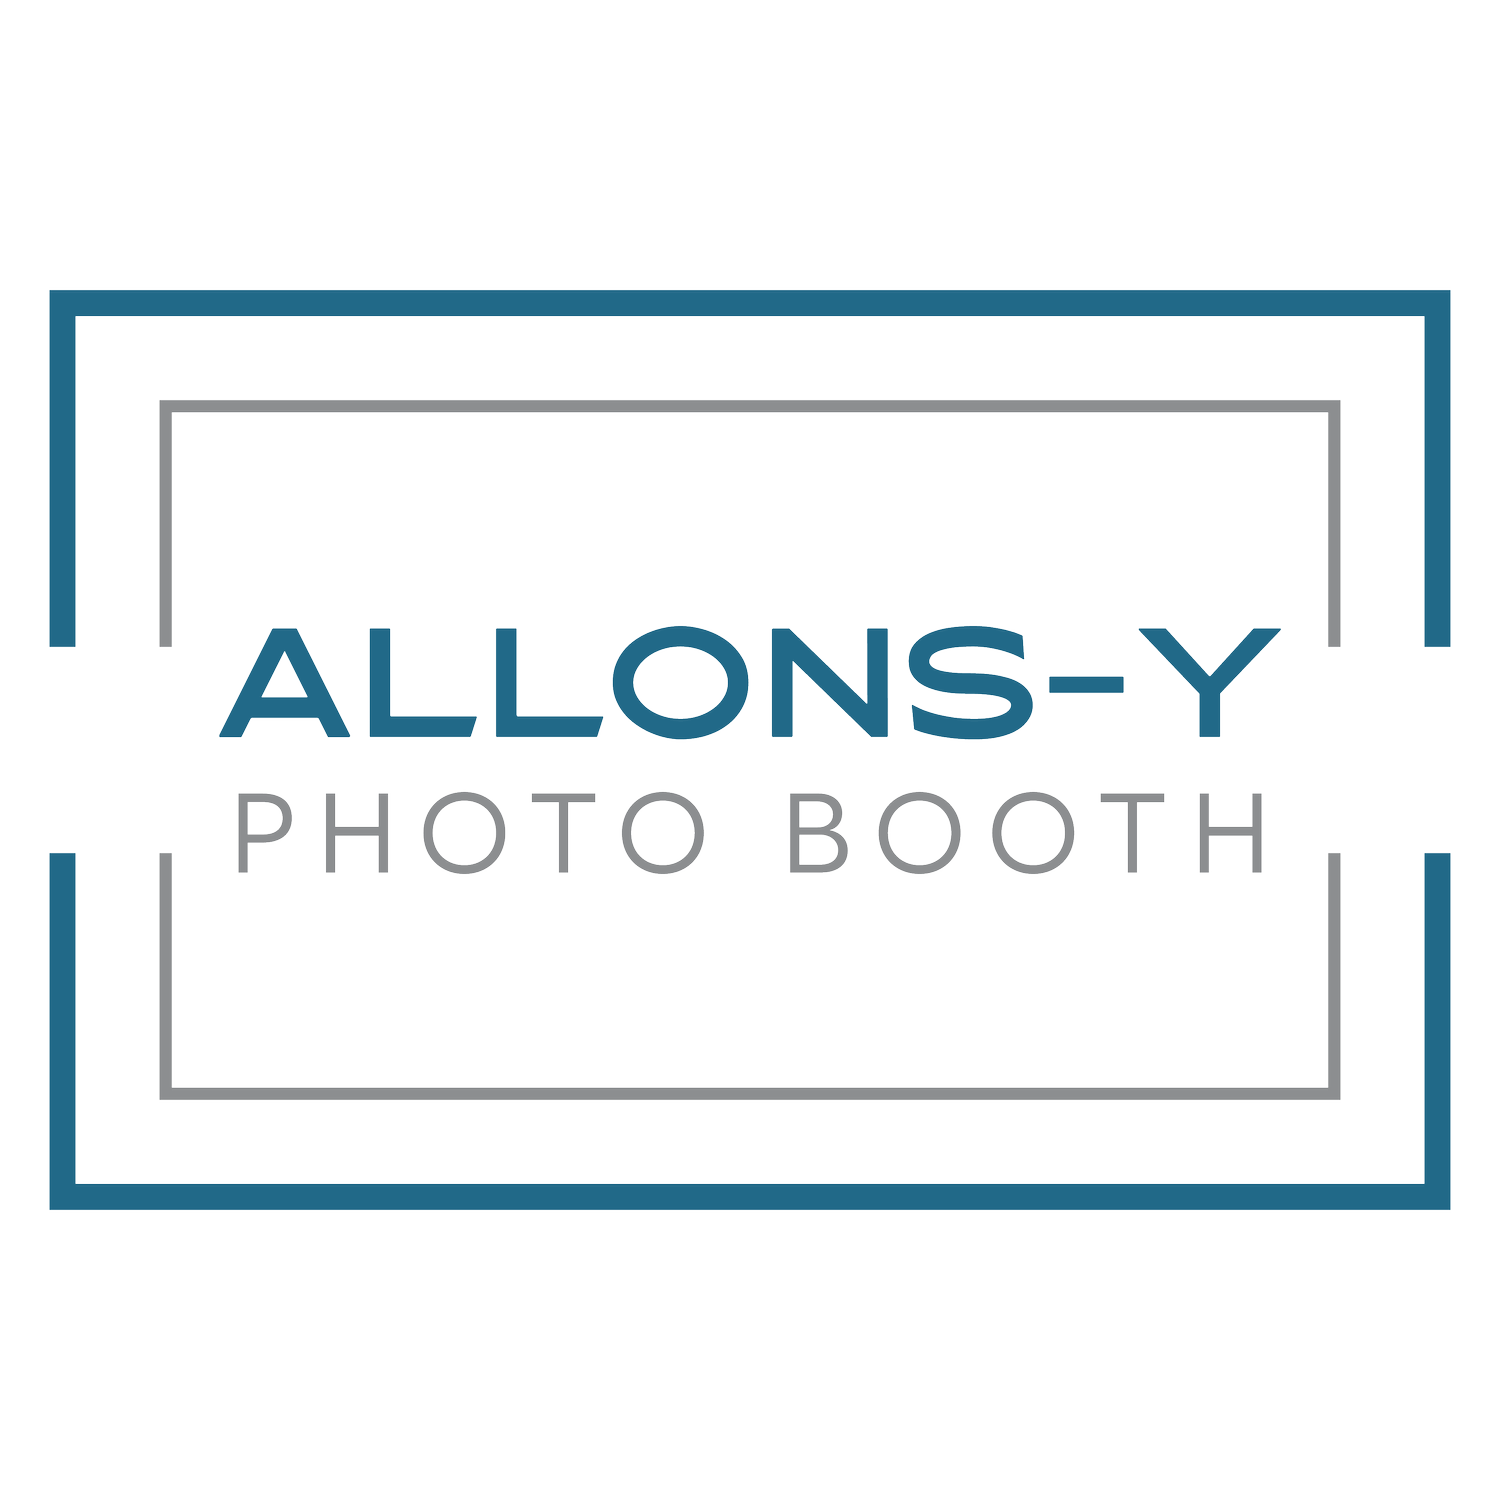 Allons-y Photo Booth